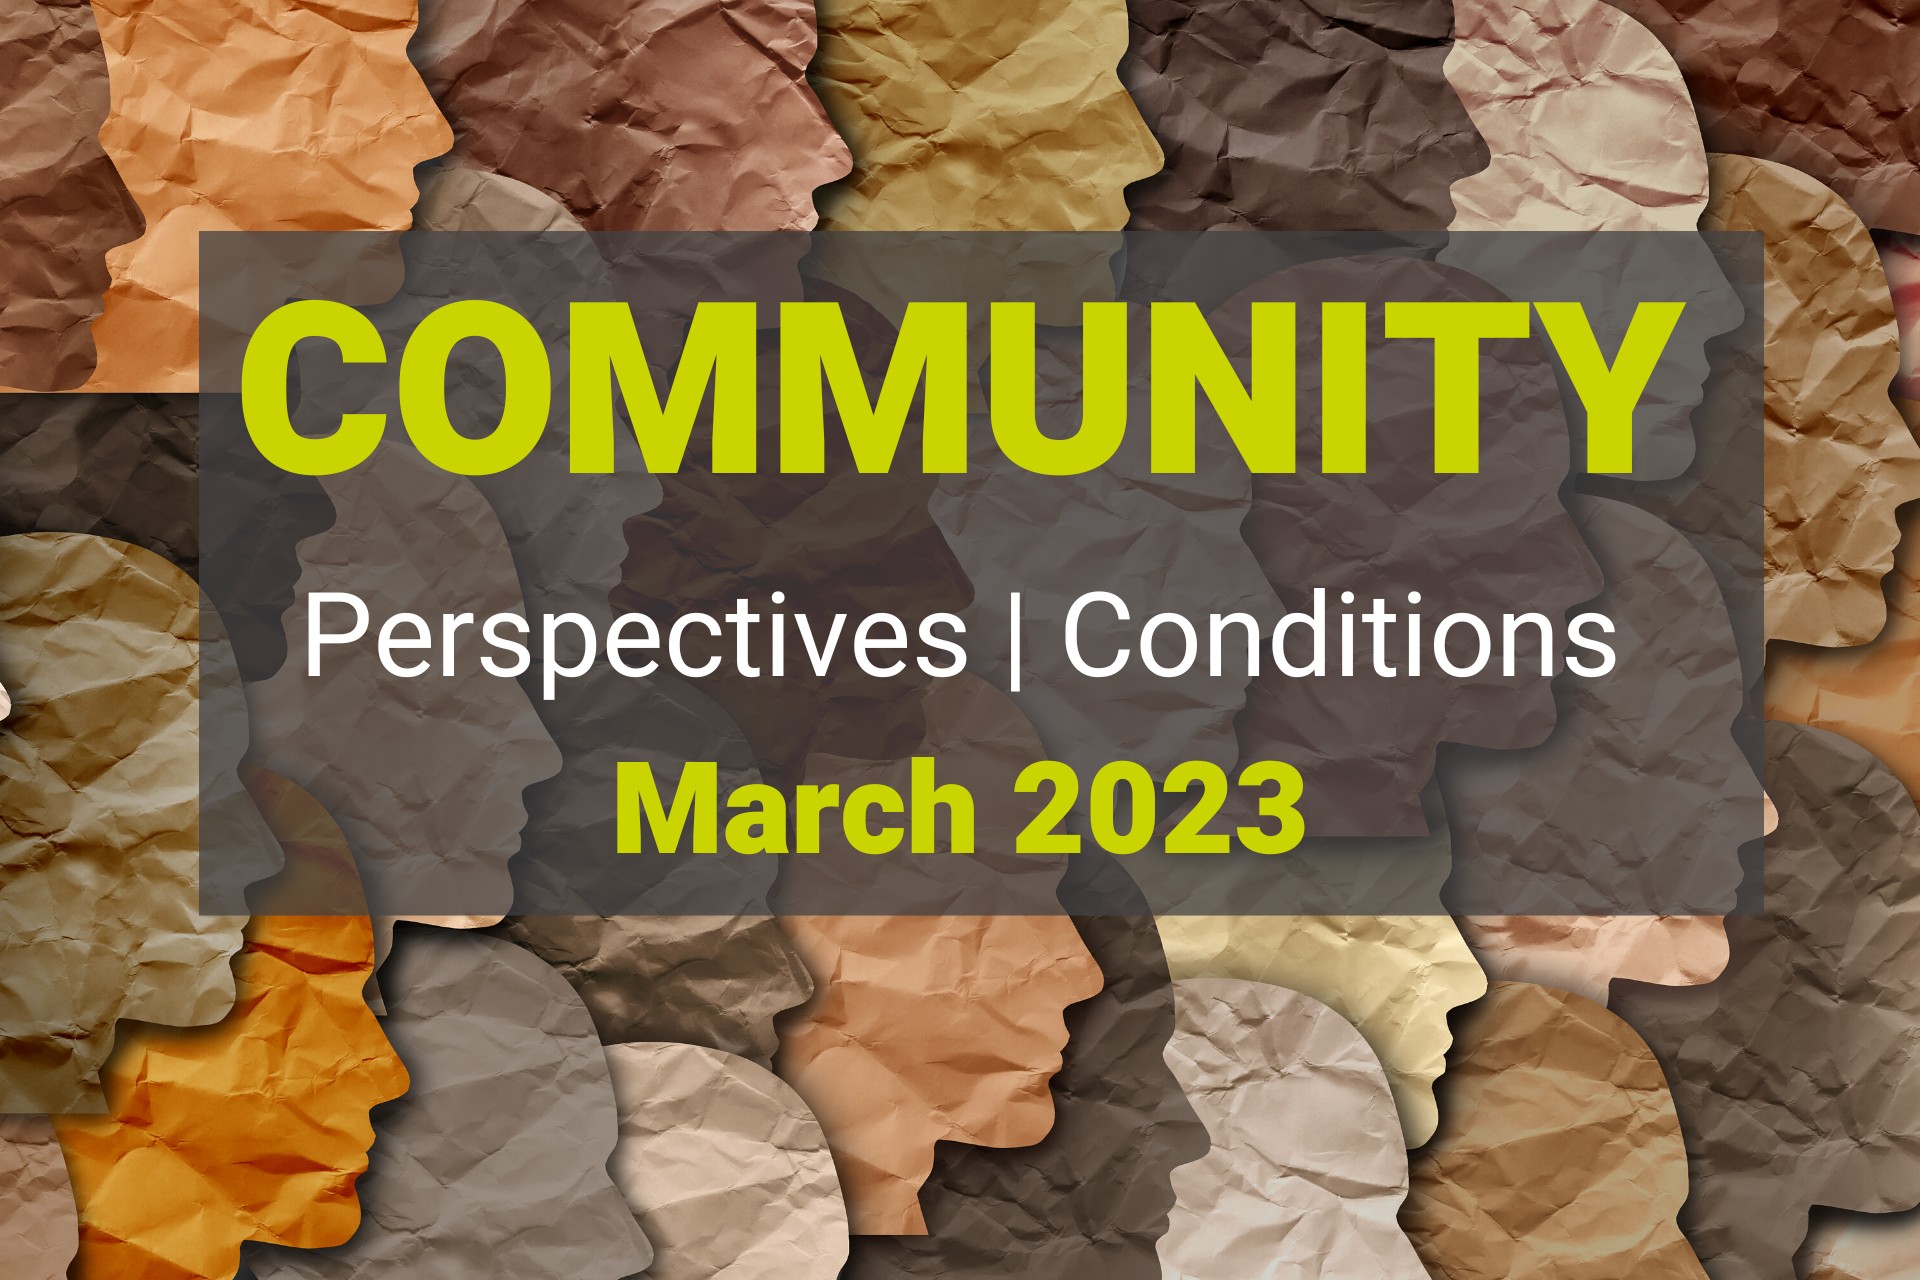 March 2023 Community Perspectives, Conditions